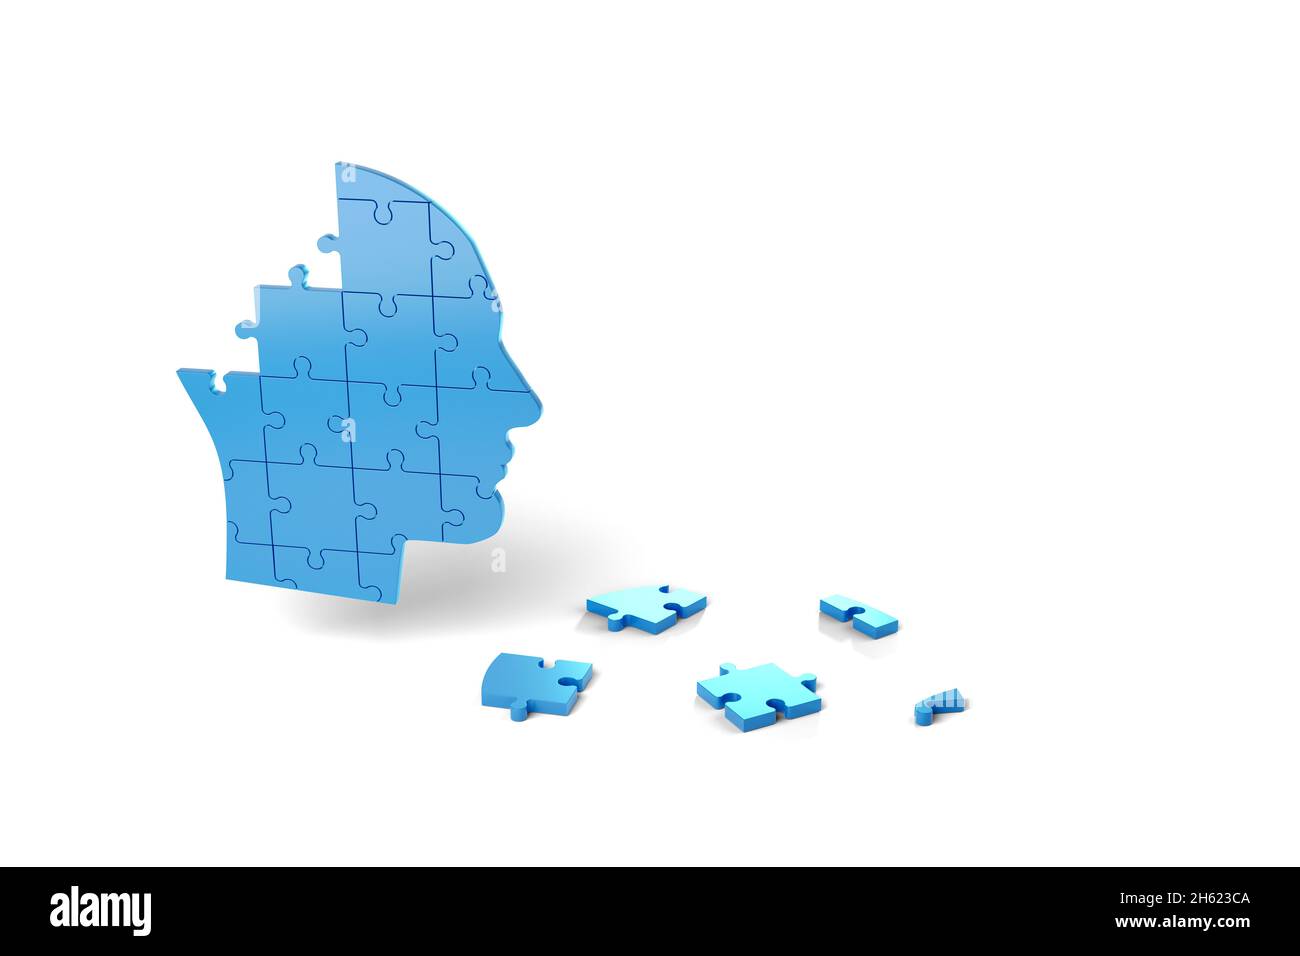 Human head with puzzle pieces. Alzheimer , dementia and mental health concept. 3d illustration. Stock Photo